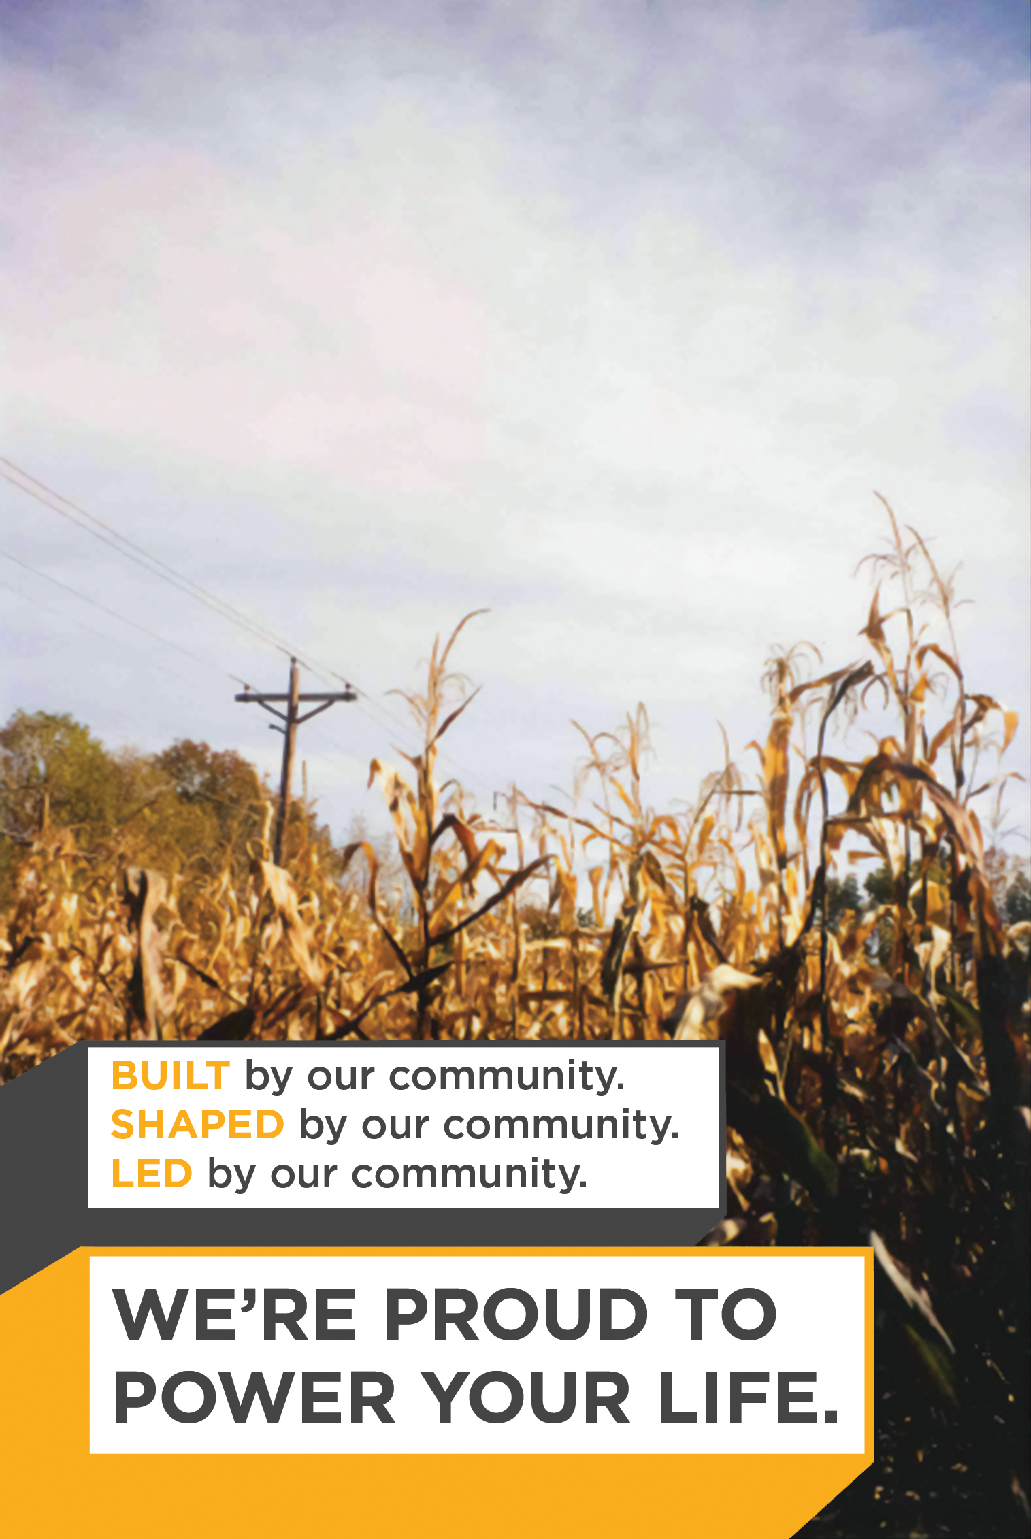 Cornfield scene with power lines above: "BUILT by our community. SHAPED by our community. LED by our community. WE'RE PROUD TO POWER YOUR LIFE."